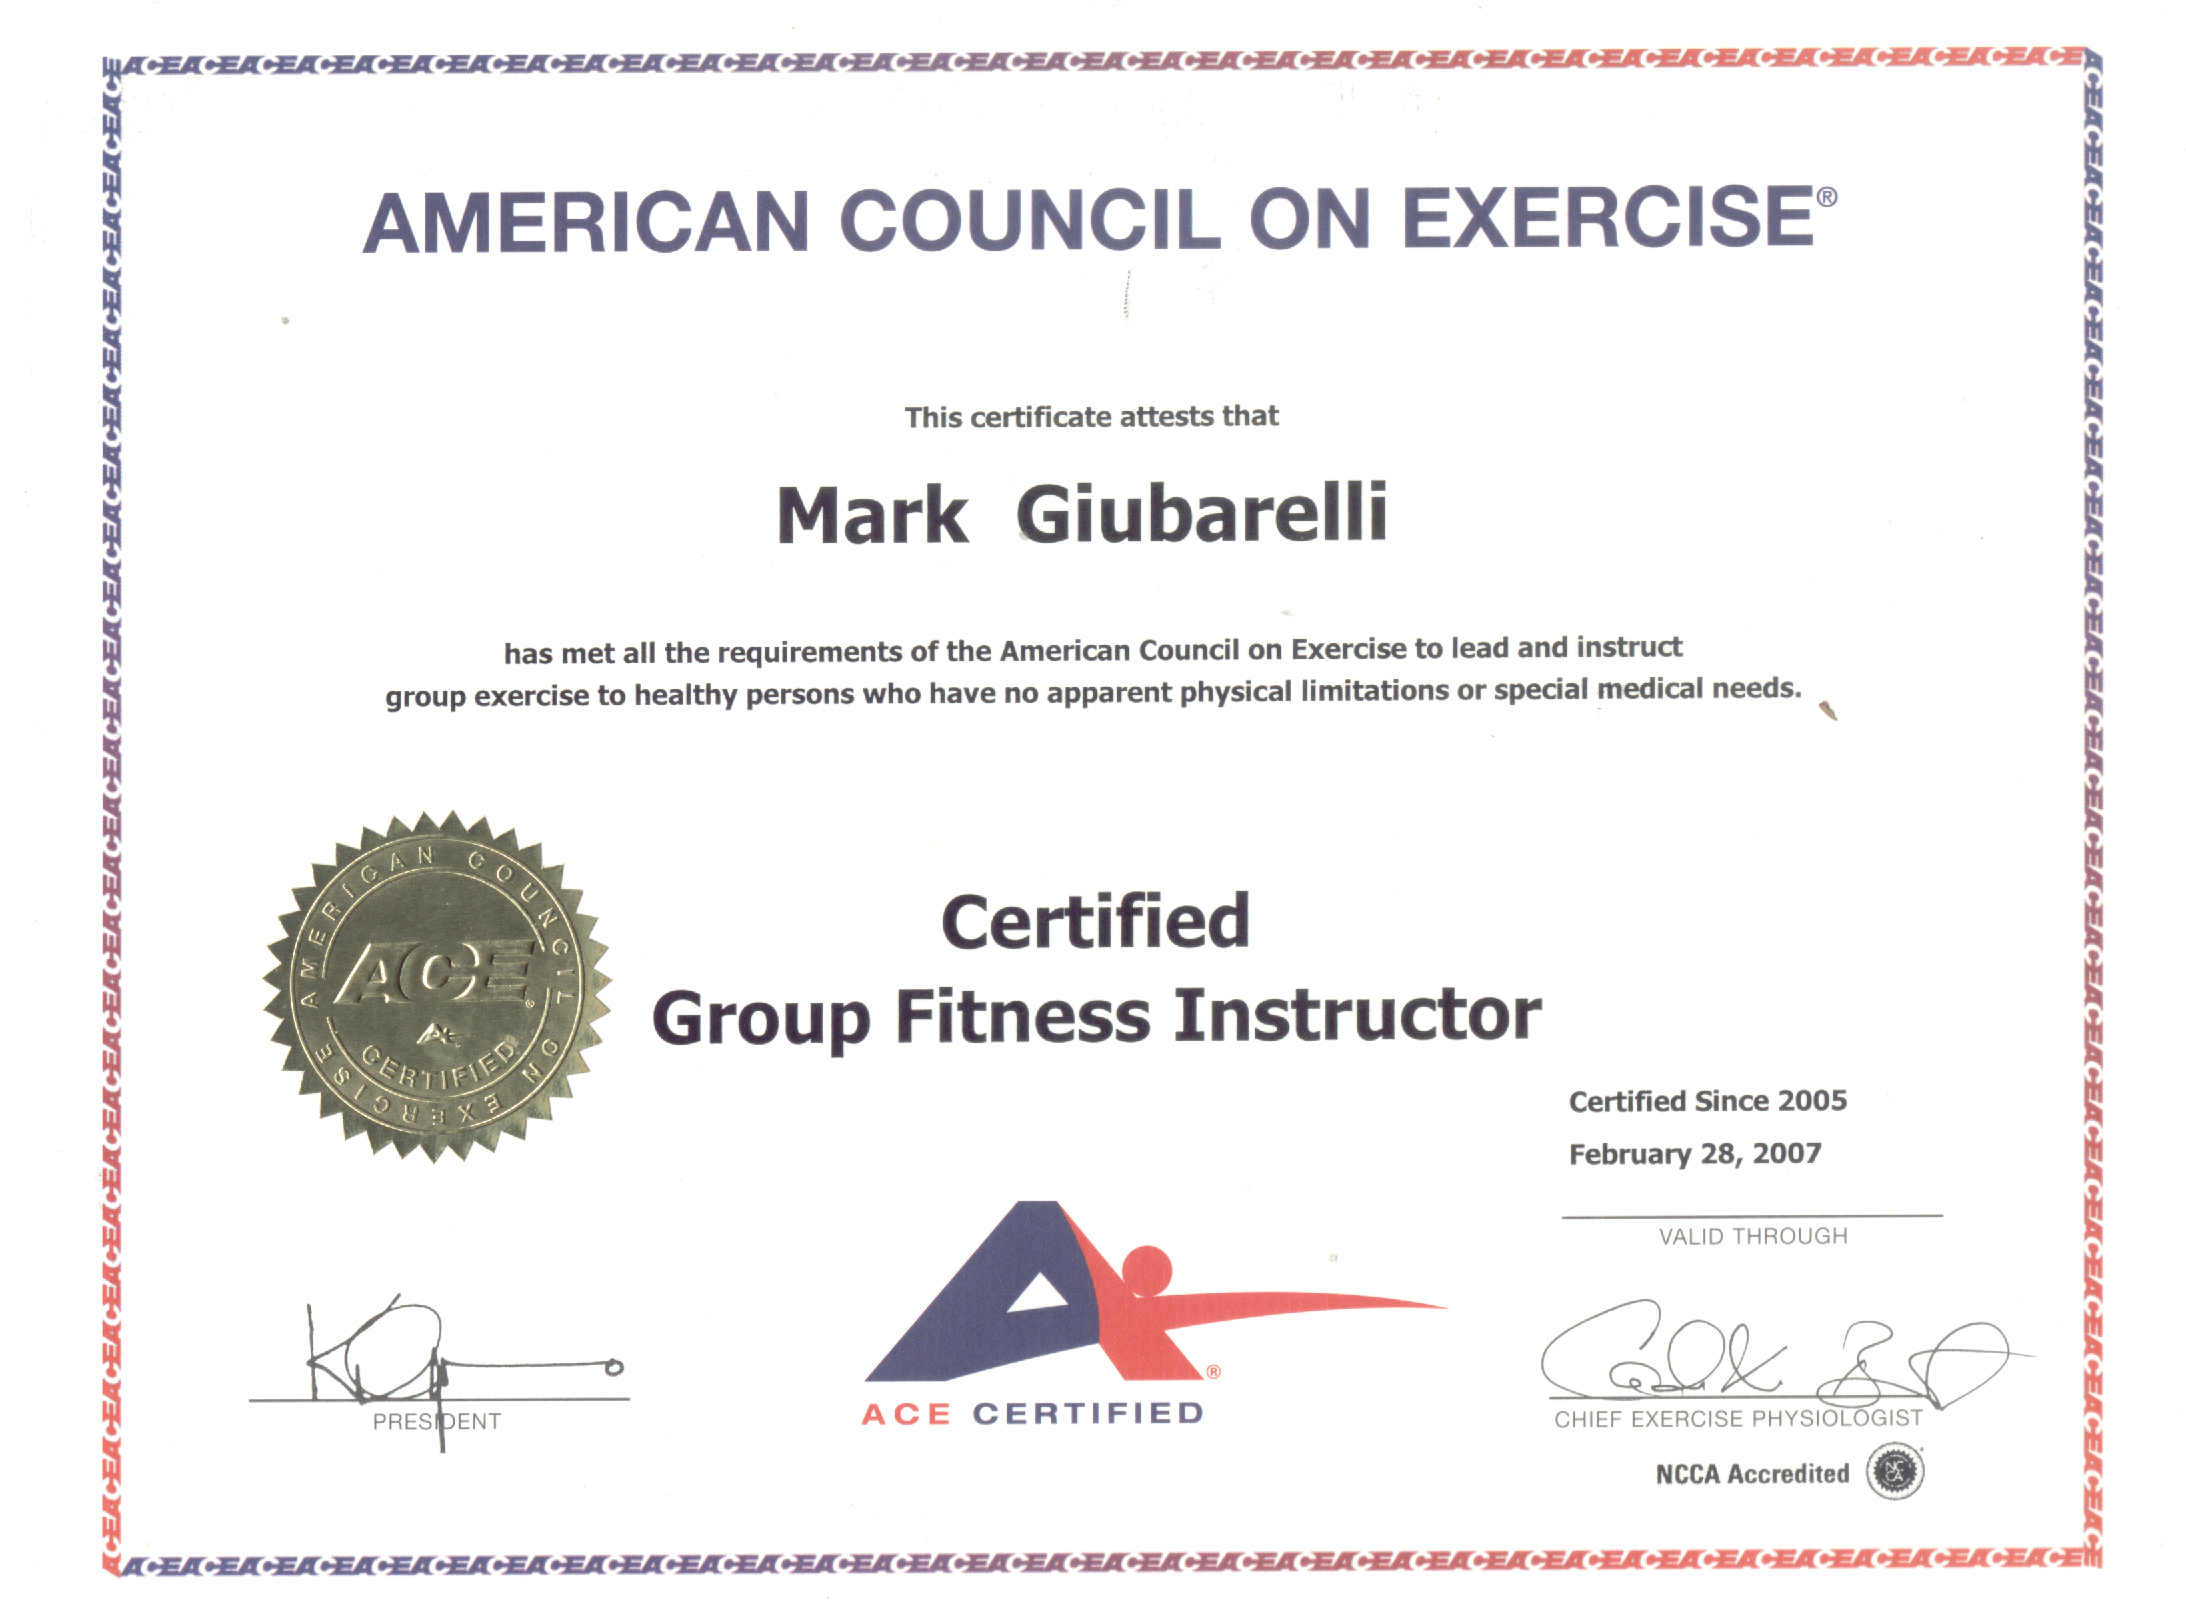 Certificate of Group Exercise Instructor